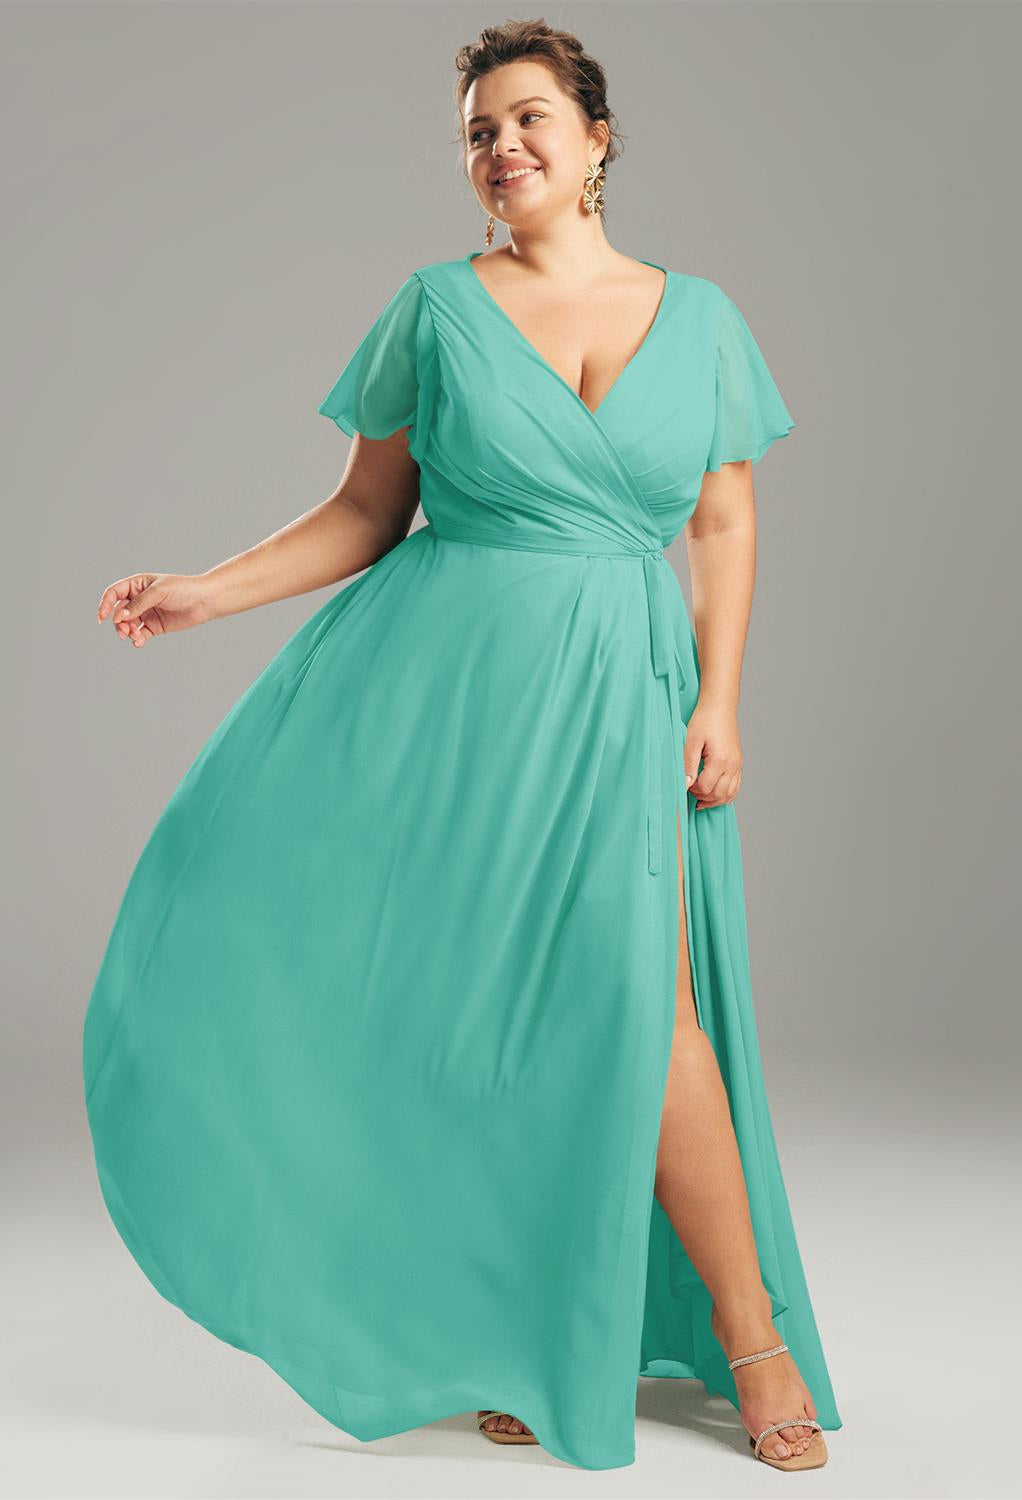 Ellison - Chiffon Bridesmaid Dress - Off The Rack with slit can be found at Bergamot Bridal, a bridal shop in London.